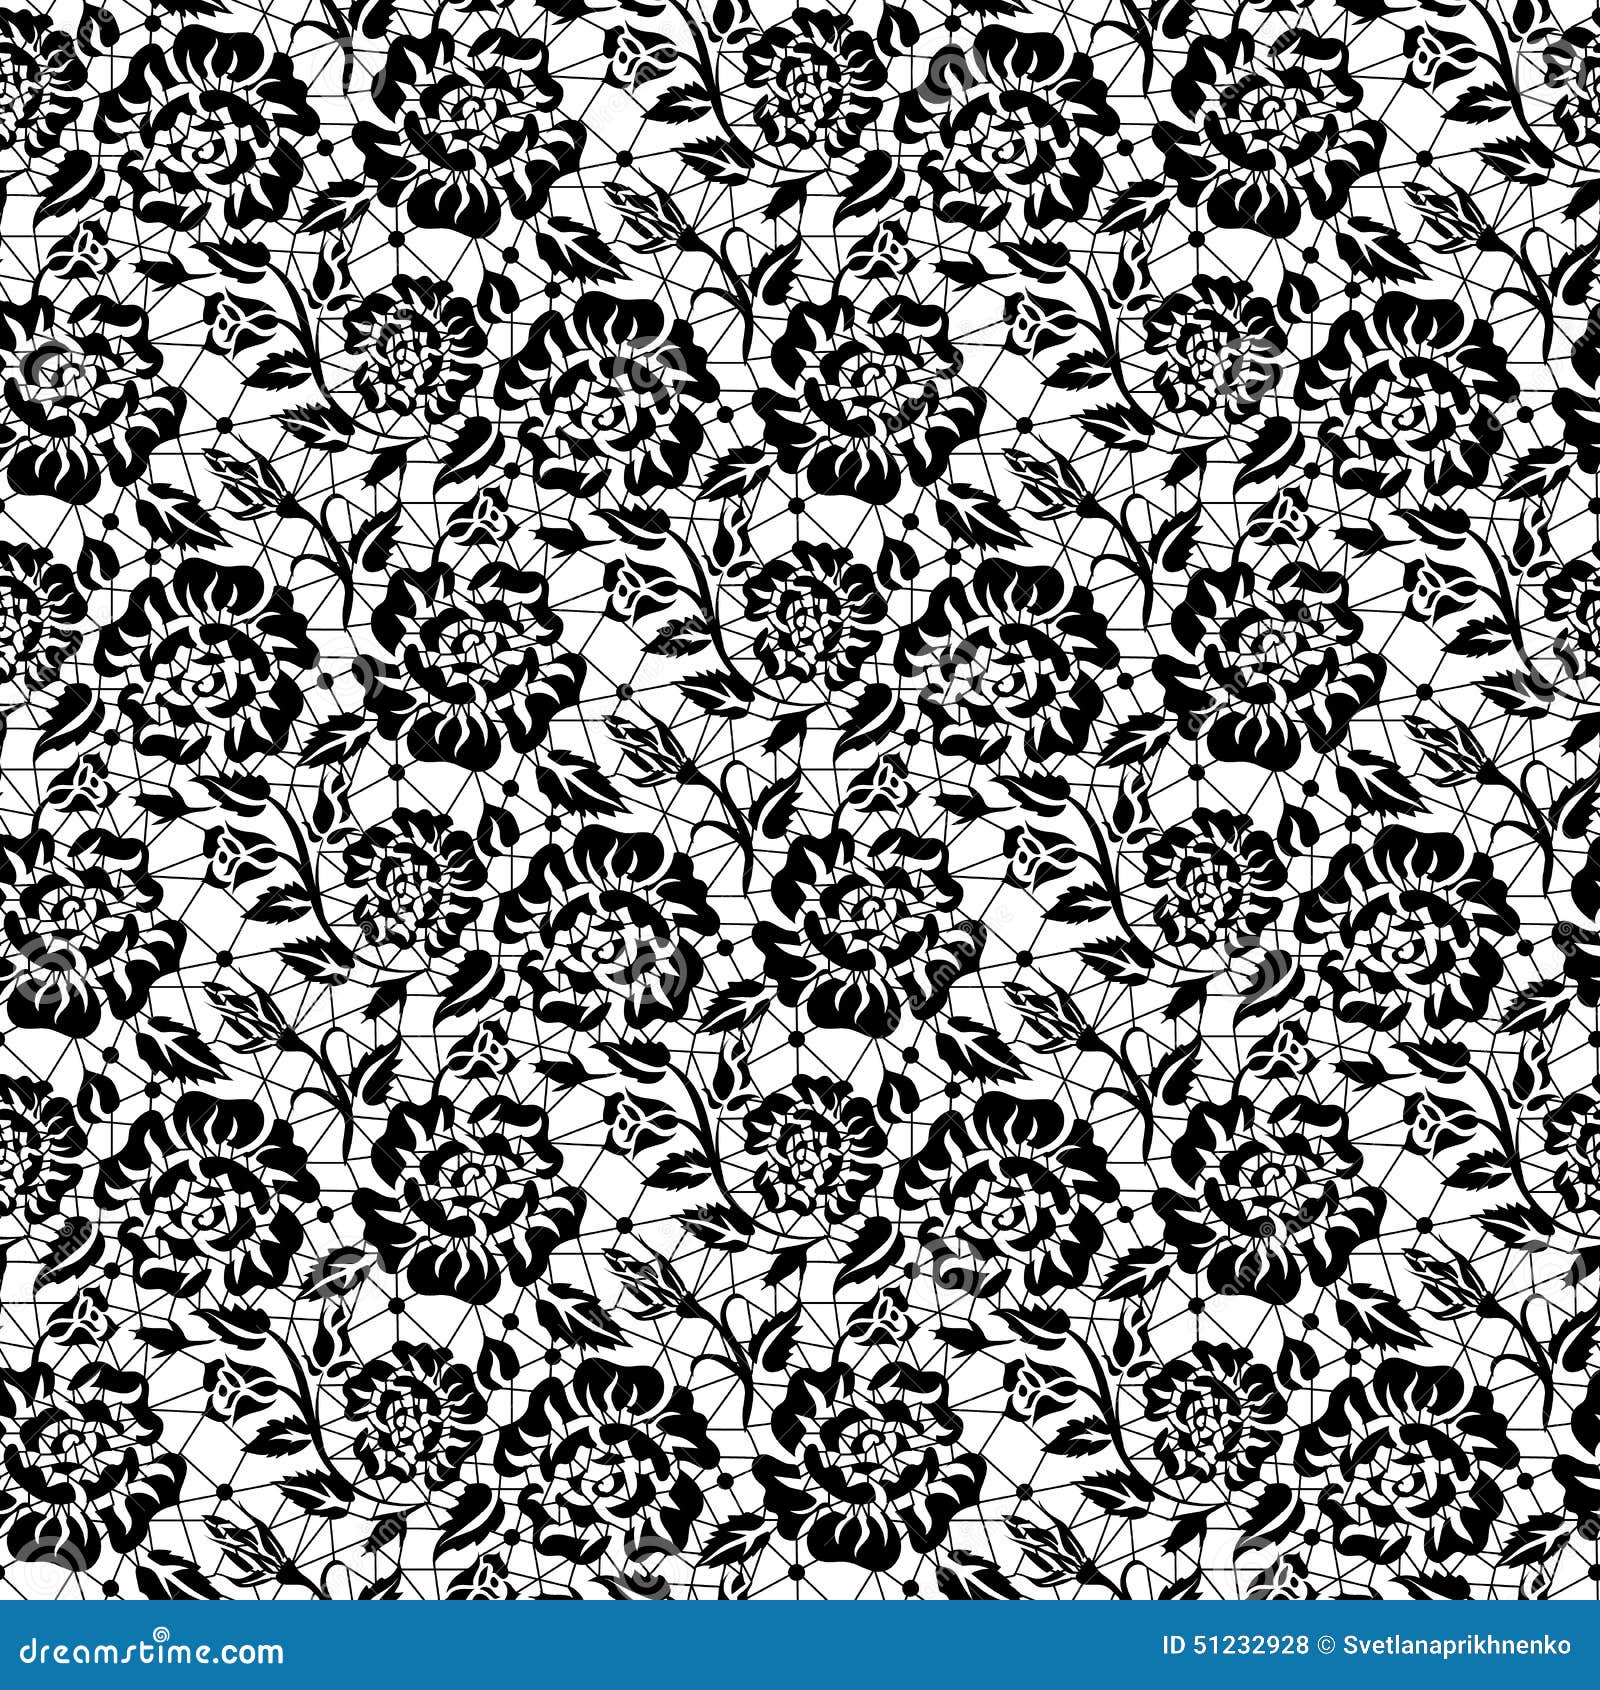 Black rose lace stock vector. Illustration of texture - 51232928